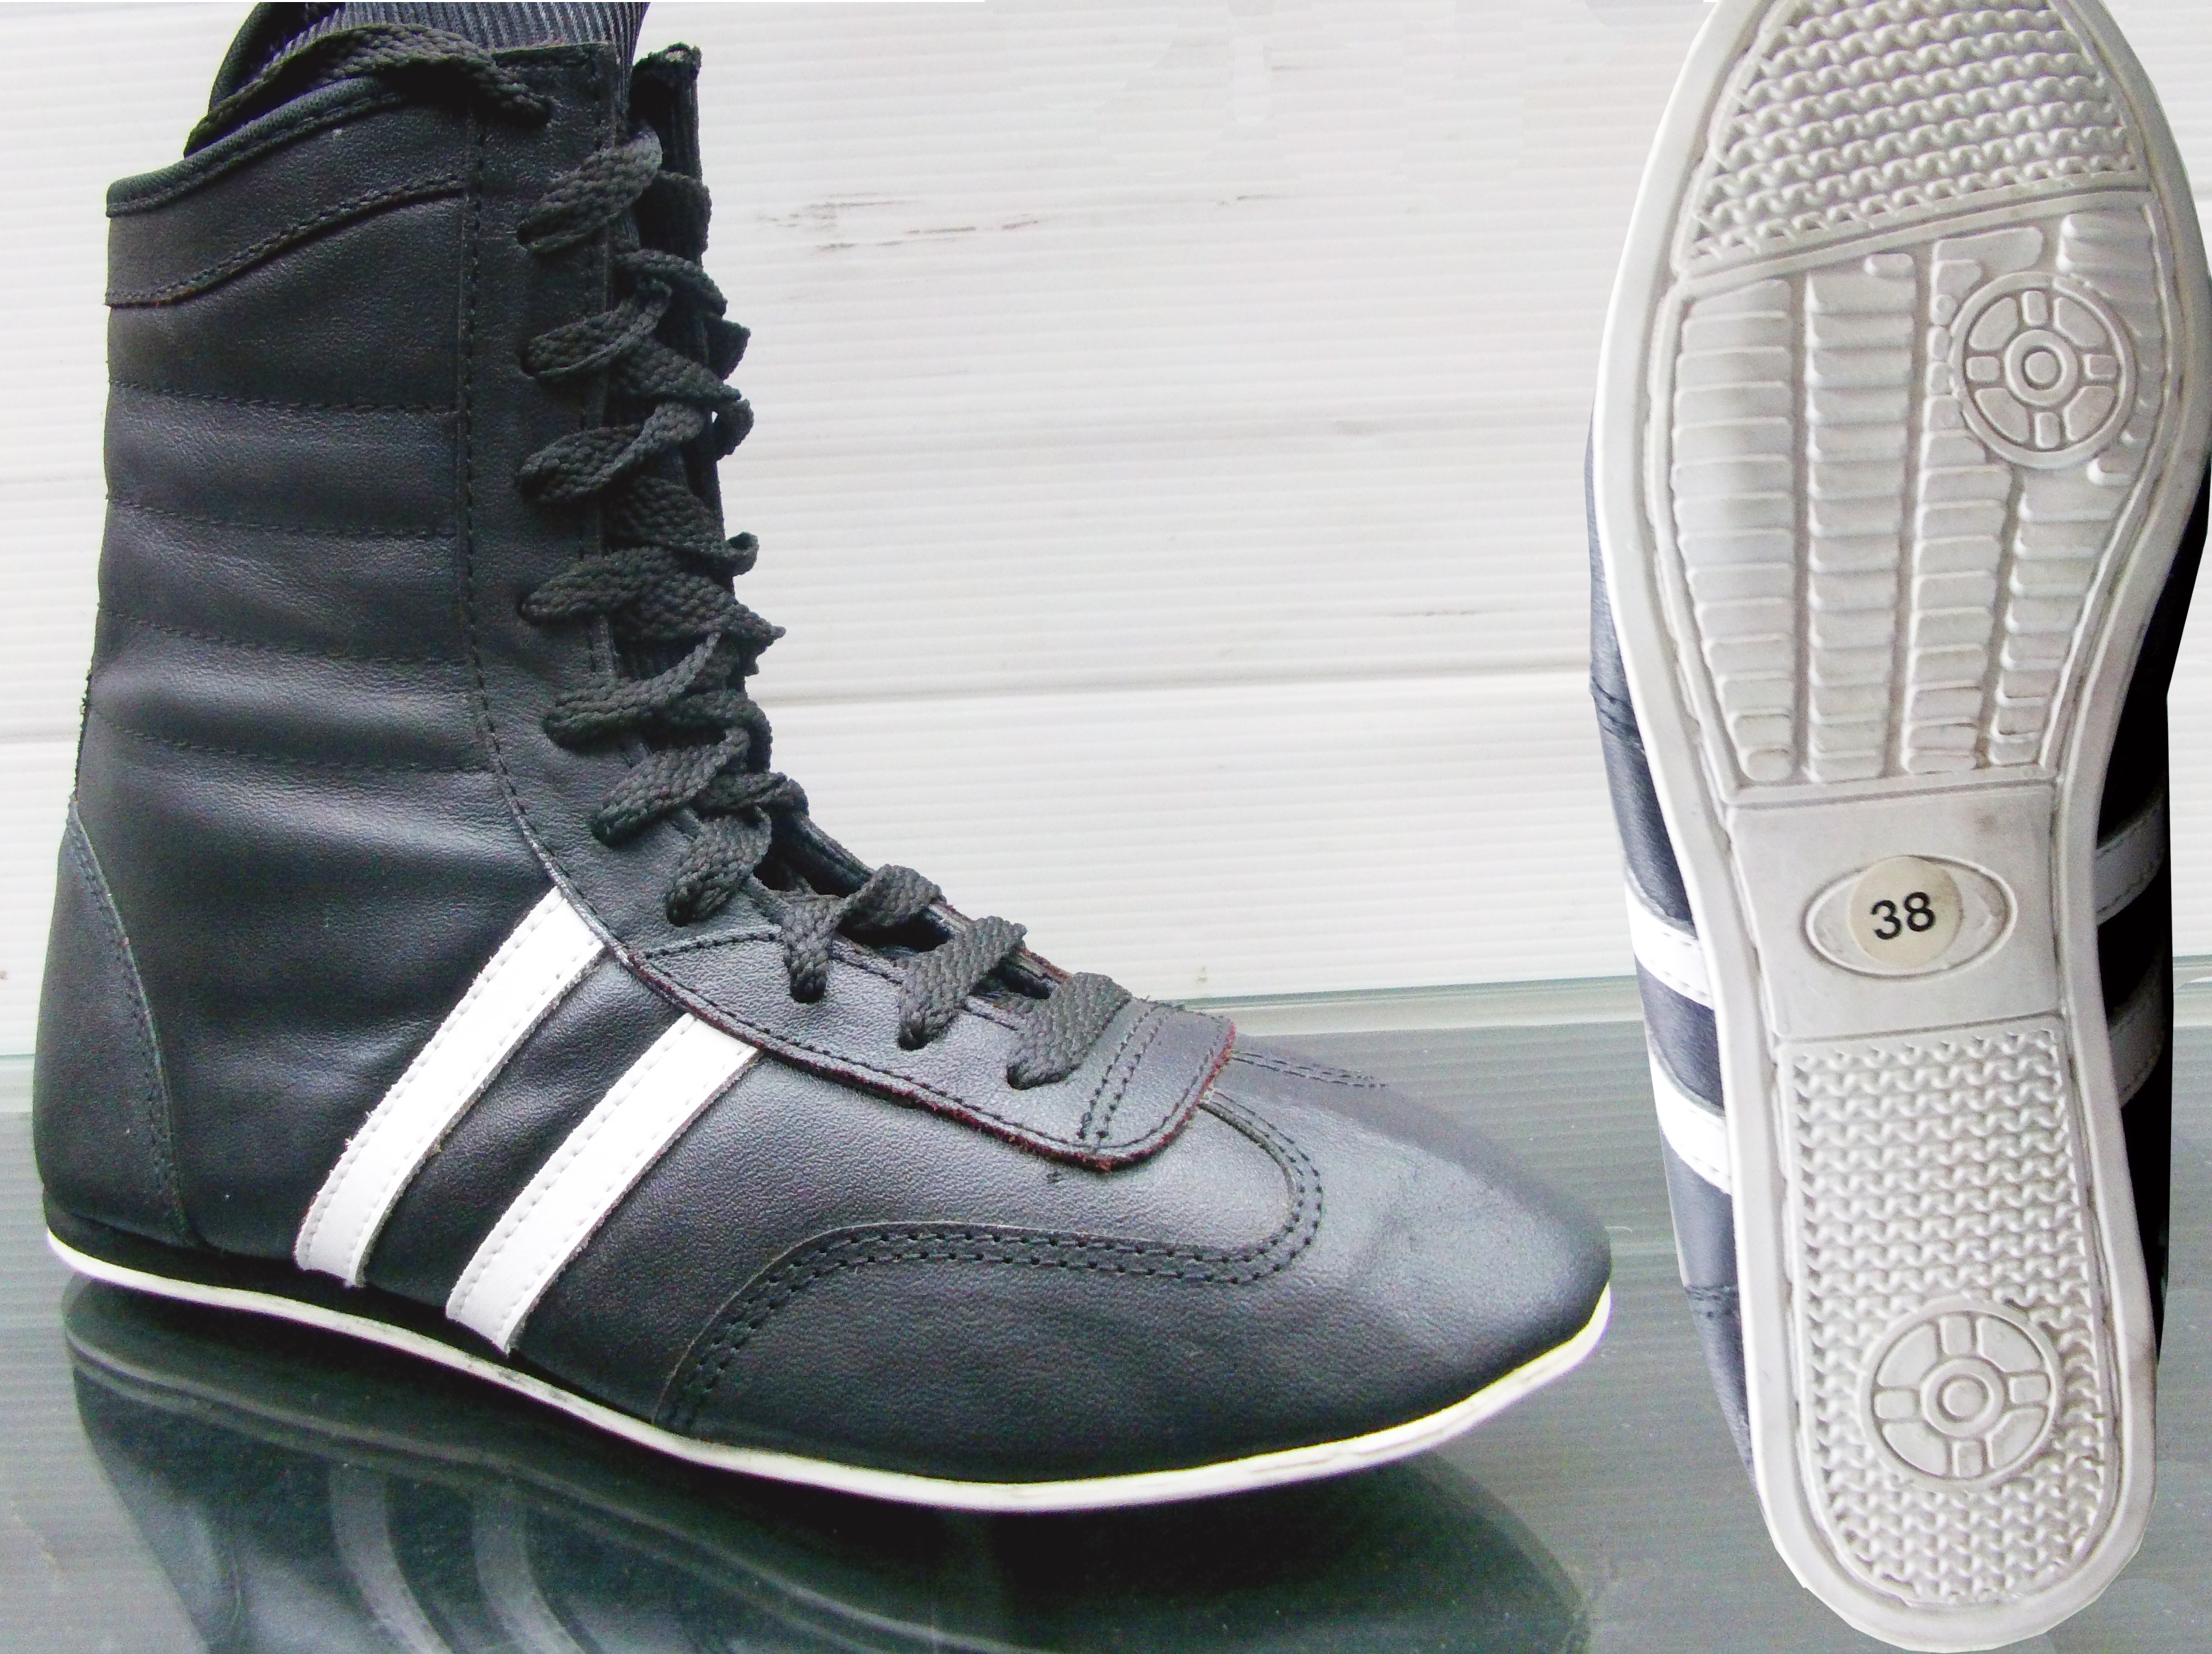 Boxing Boot PU leather Was £ 35.00 Now £ 14.99 only